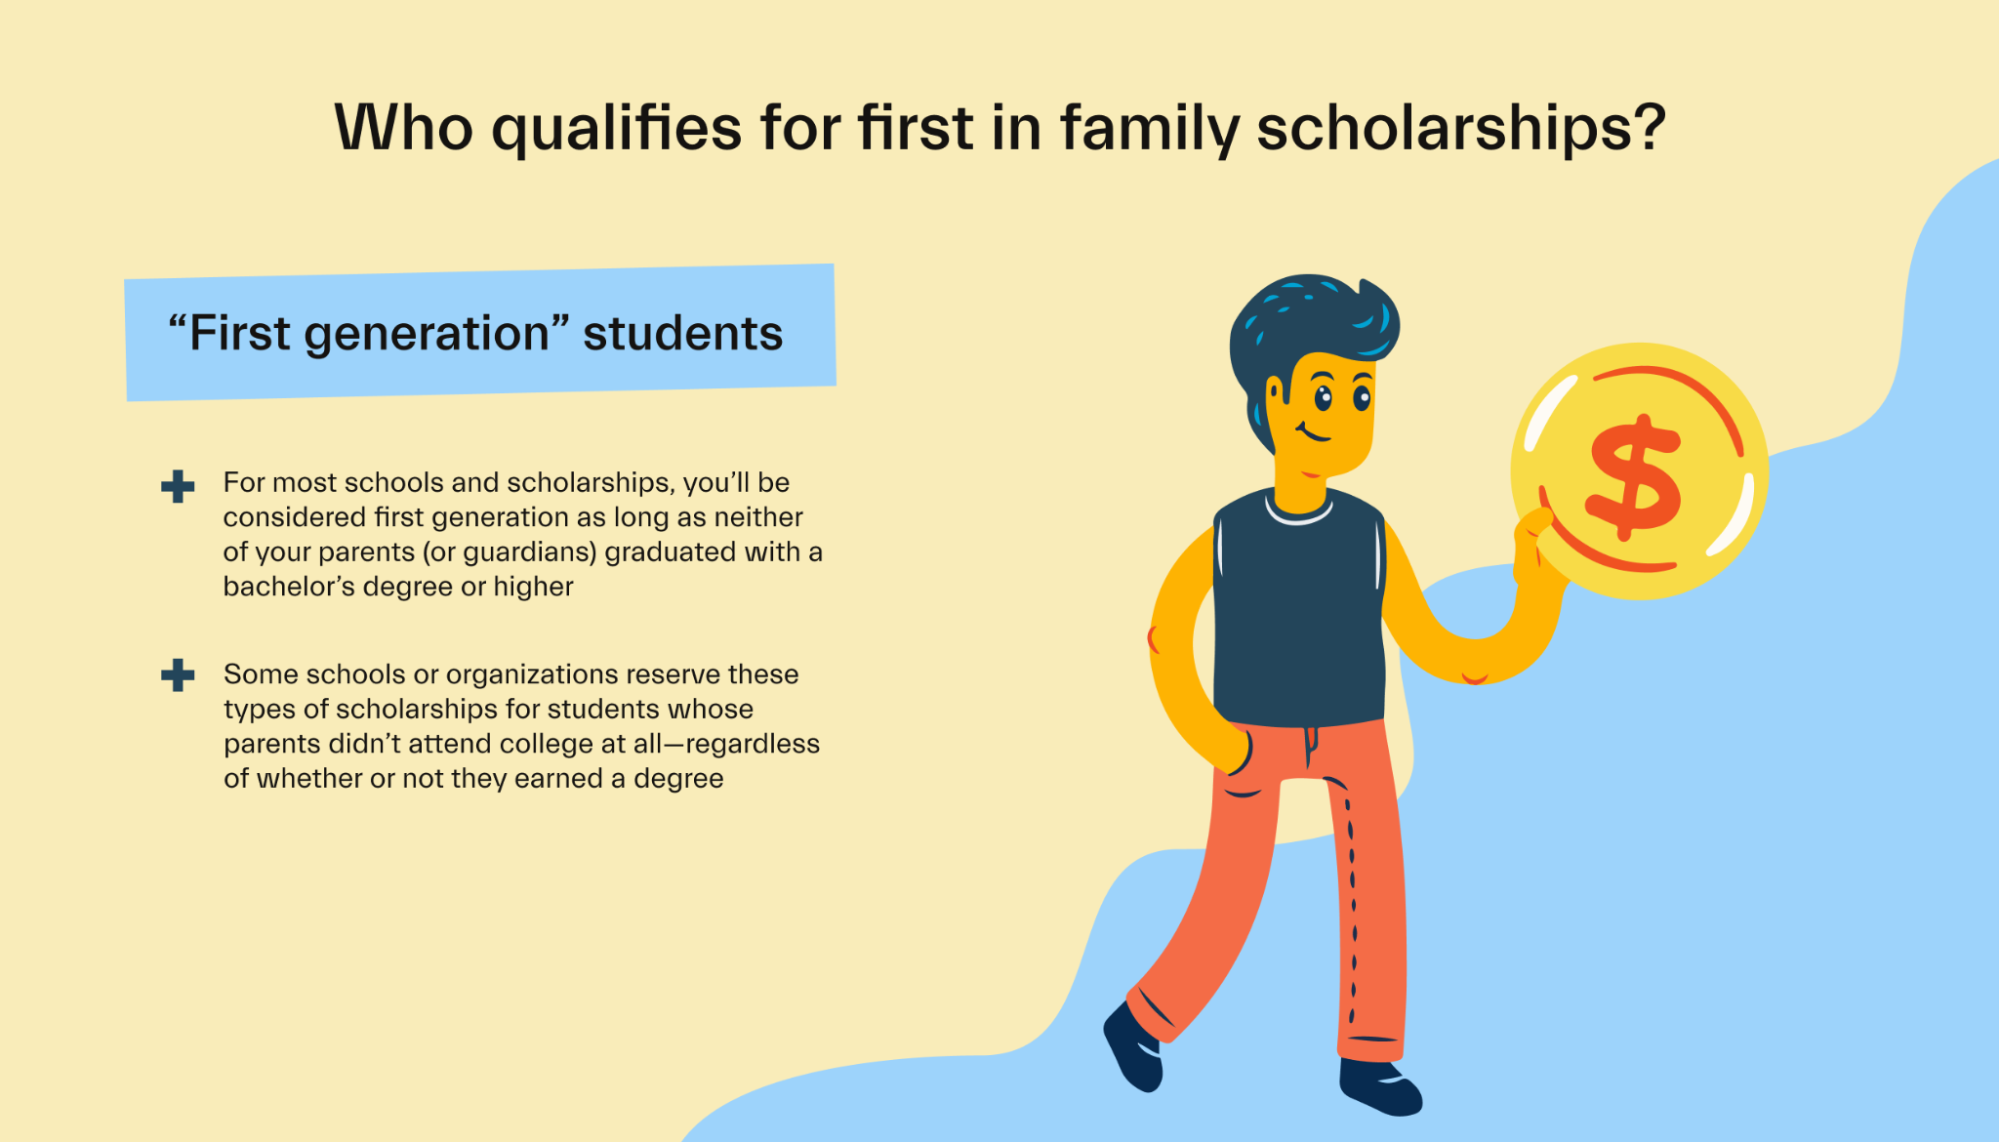 Who qualifies for first in family scholarships?